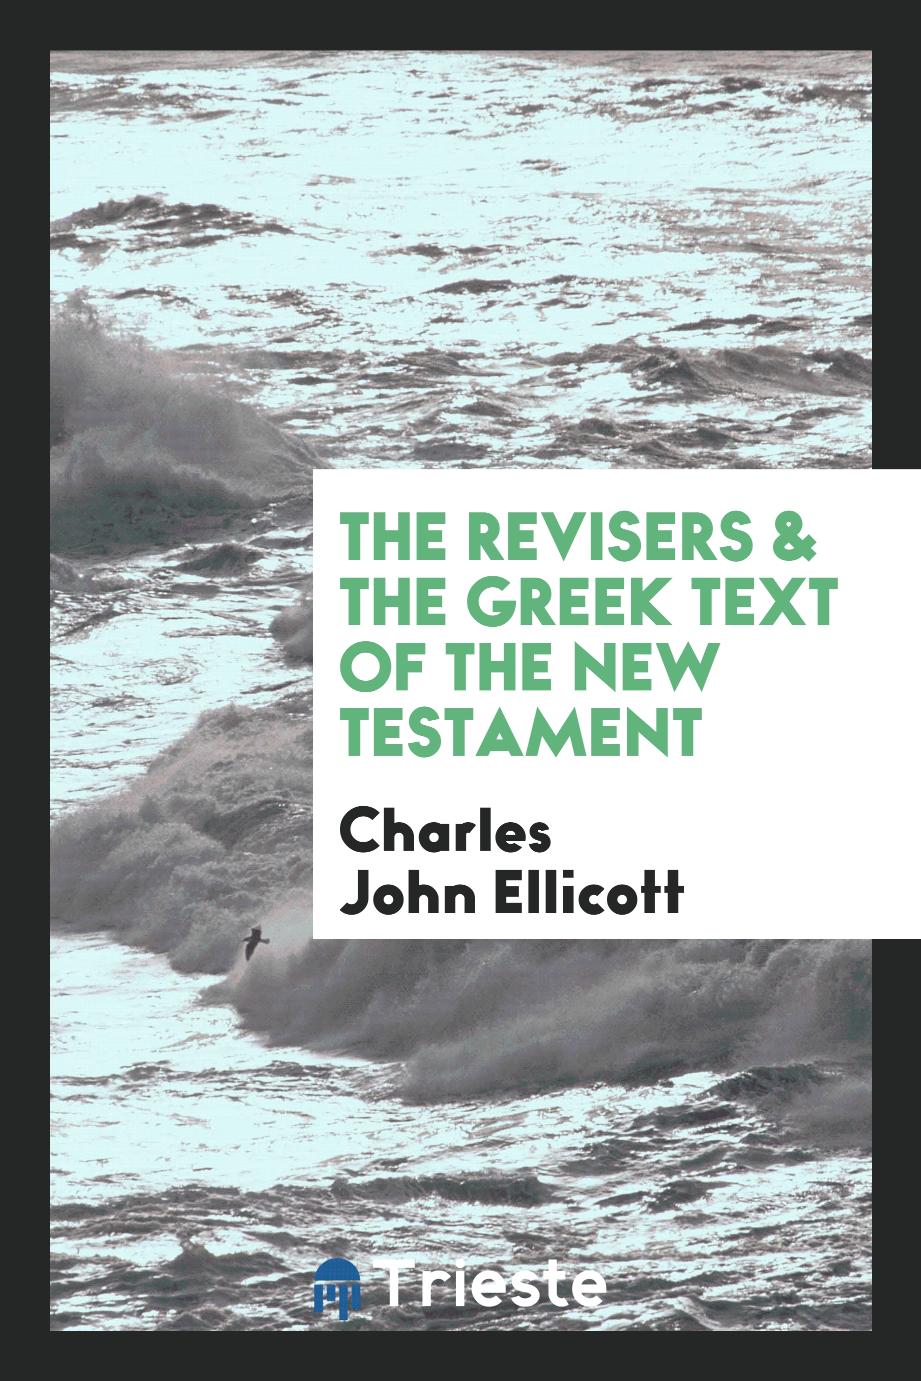 The Revisers & the Greek Text of the New Testament